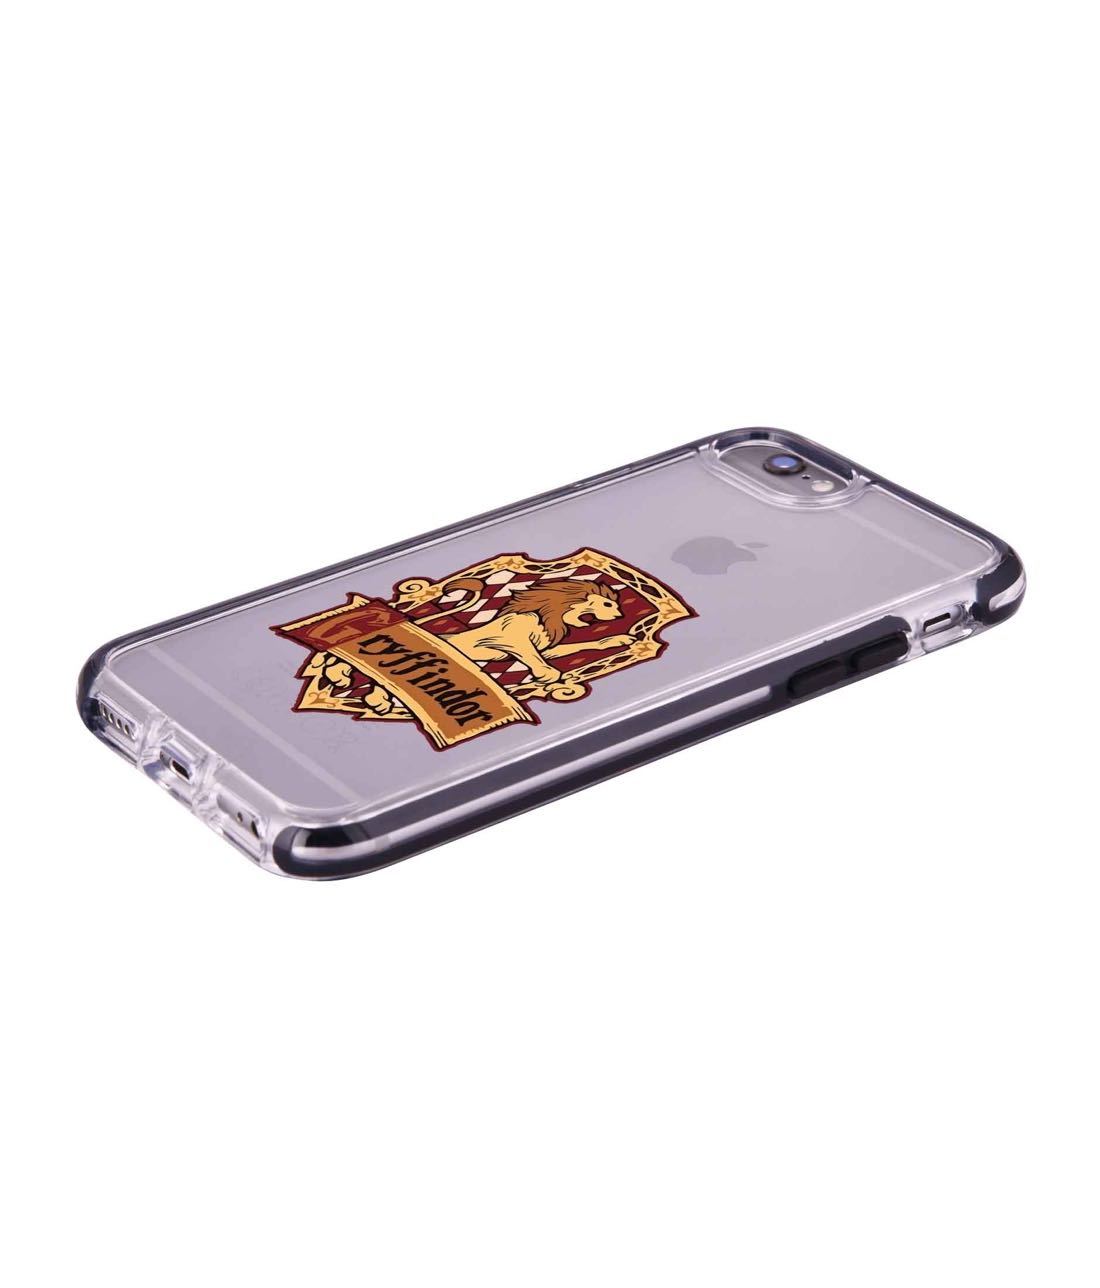 Crest Gryffindor - Extreme Phone Case for iPhone 6S